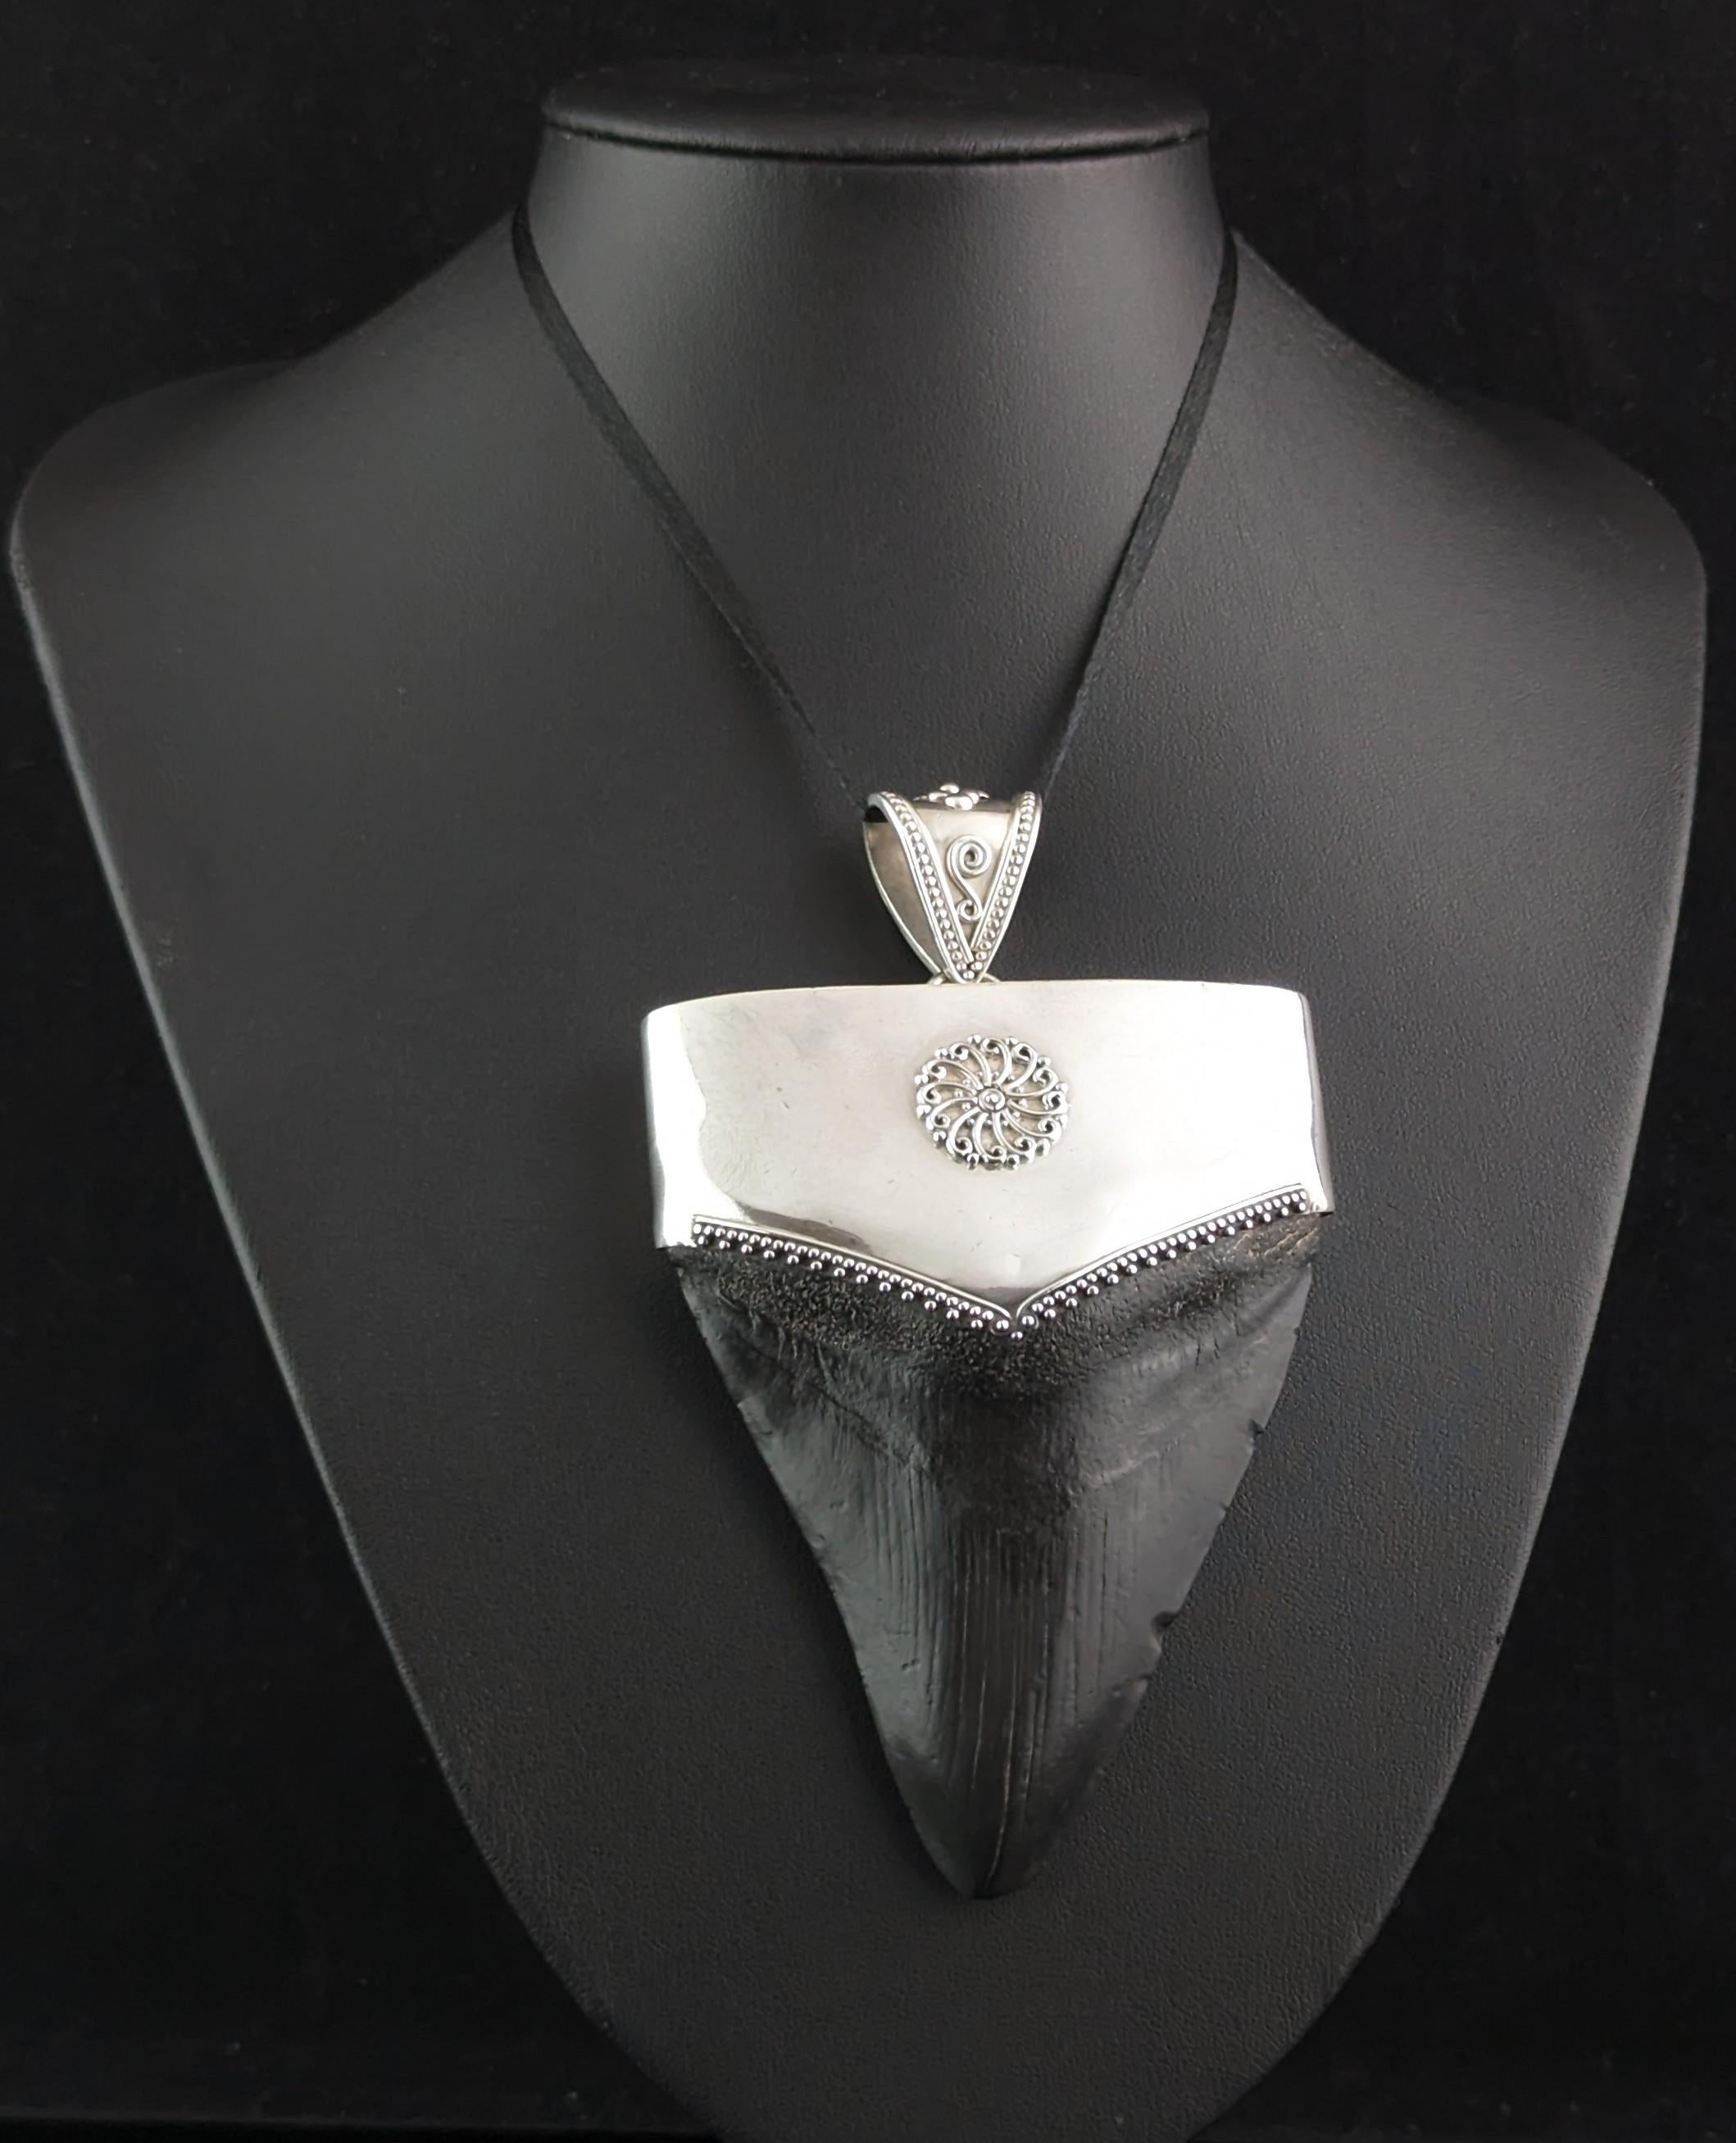 This rare and unusual vintage pendant really stands out from the crowd.

It is a huge chunky pendant crafted in sterling silver with a repousse design, the silver mont holds a huge fossilised Megalodon tooth.

The tooth has natural striations and